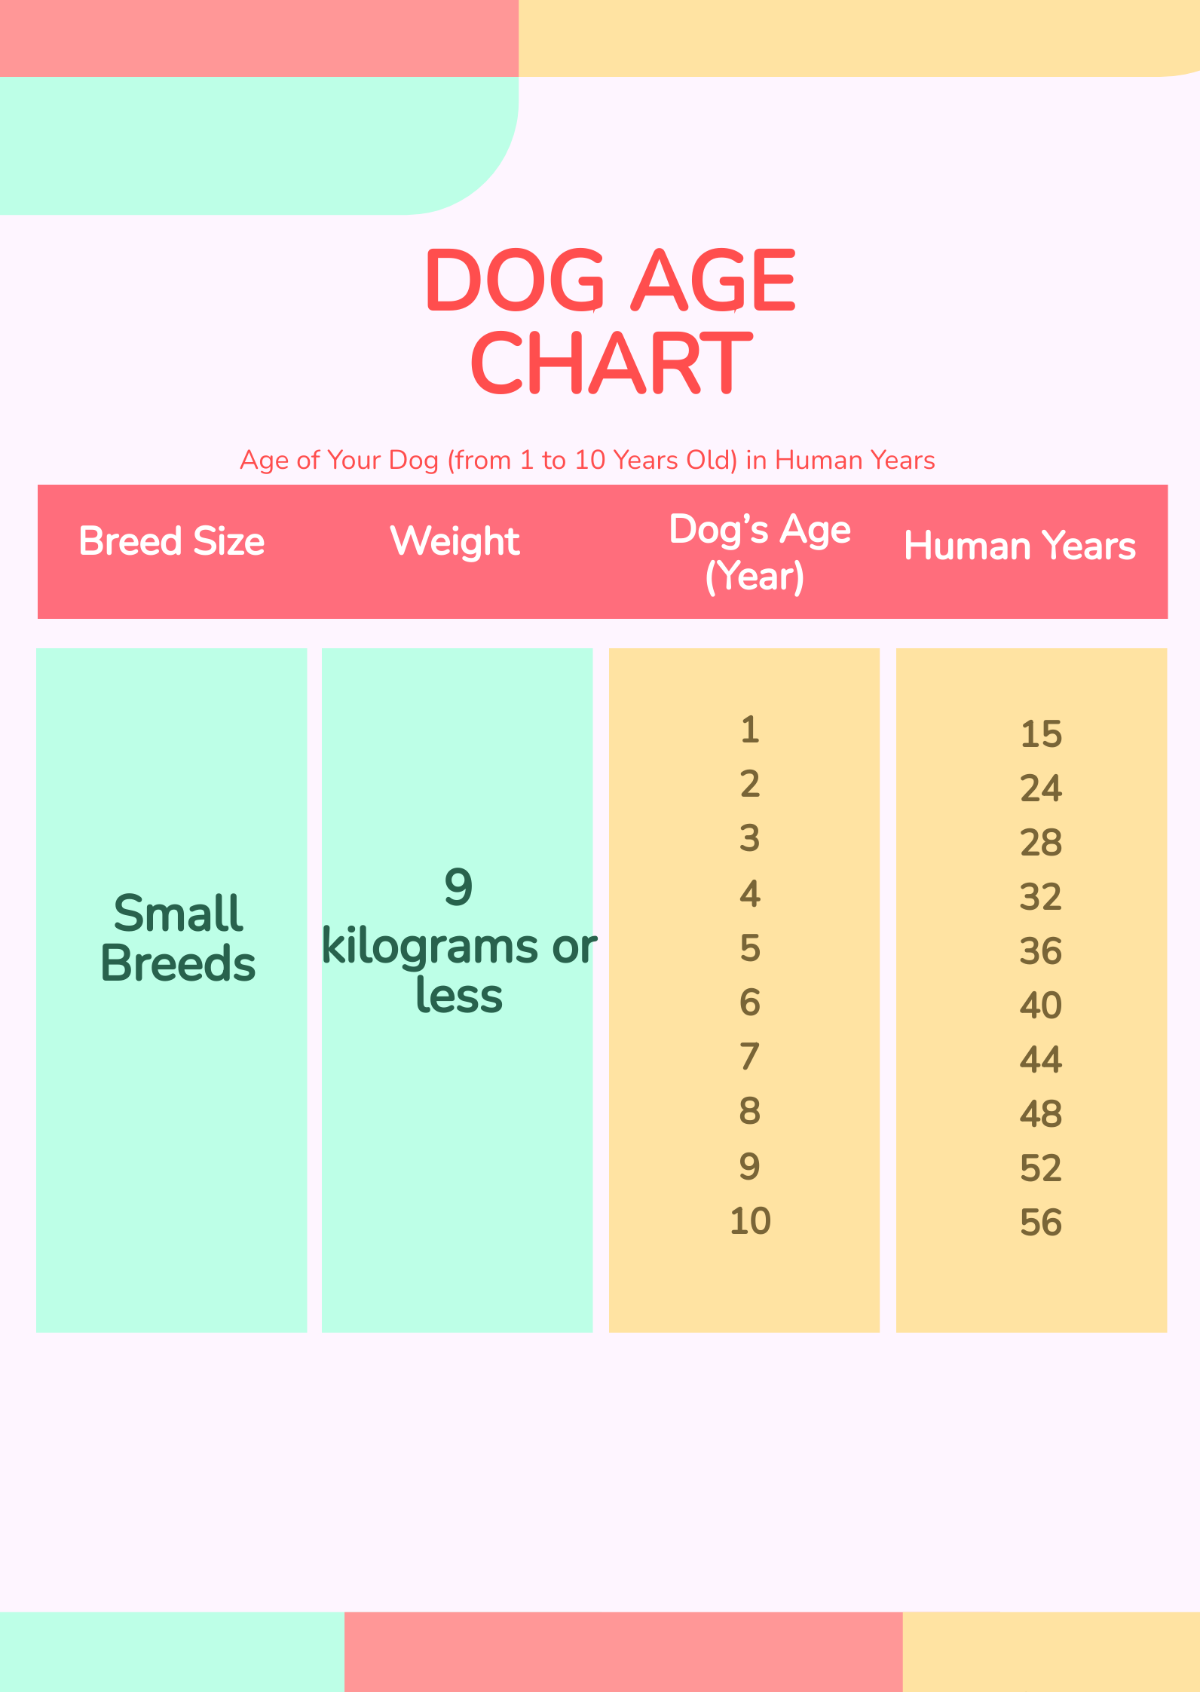 FREE Dog Age Chart Templates - Edit Online & Download | Template.net